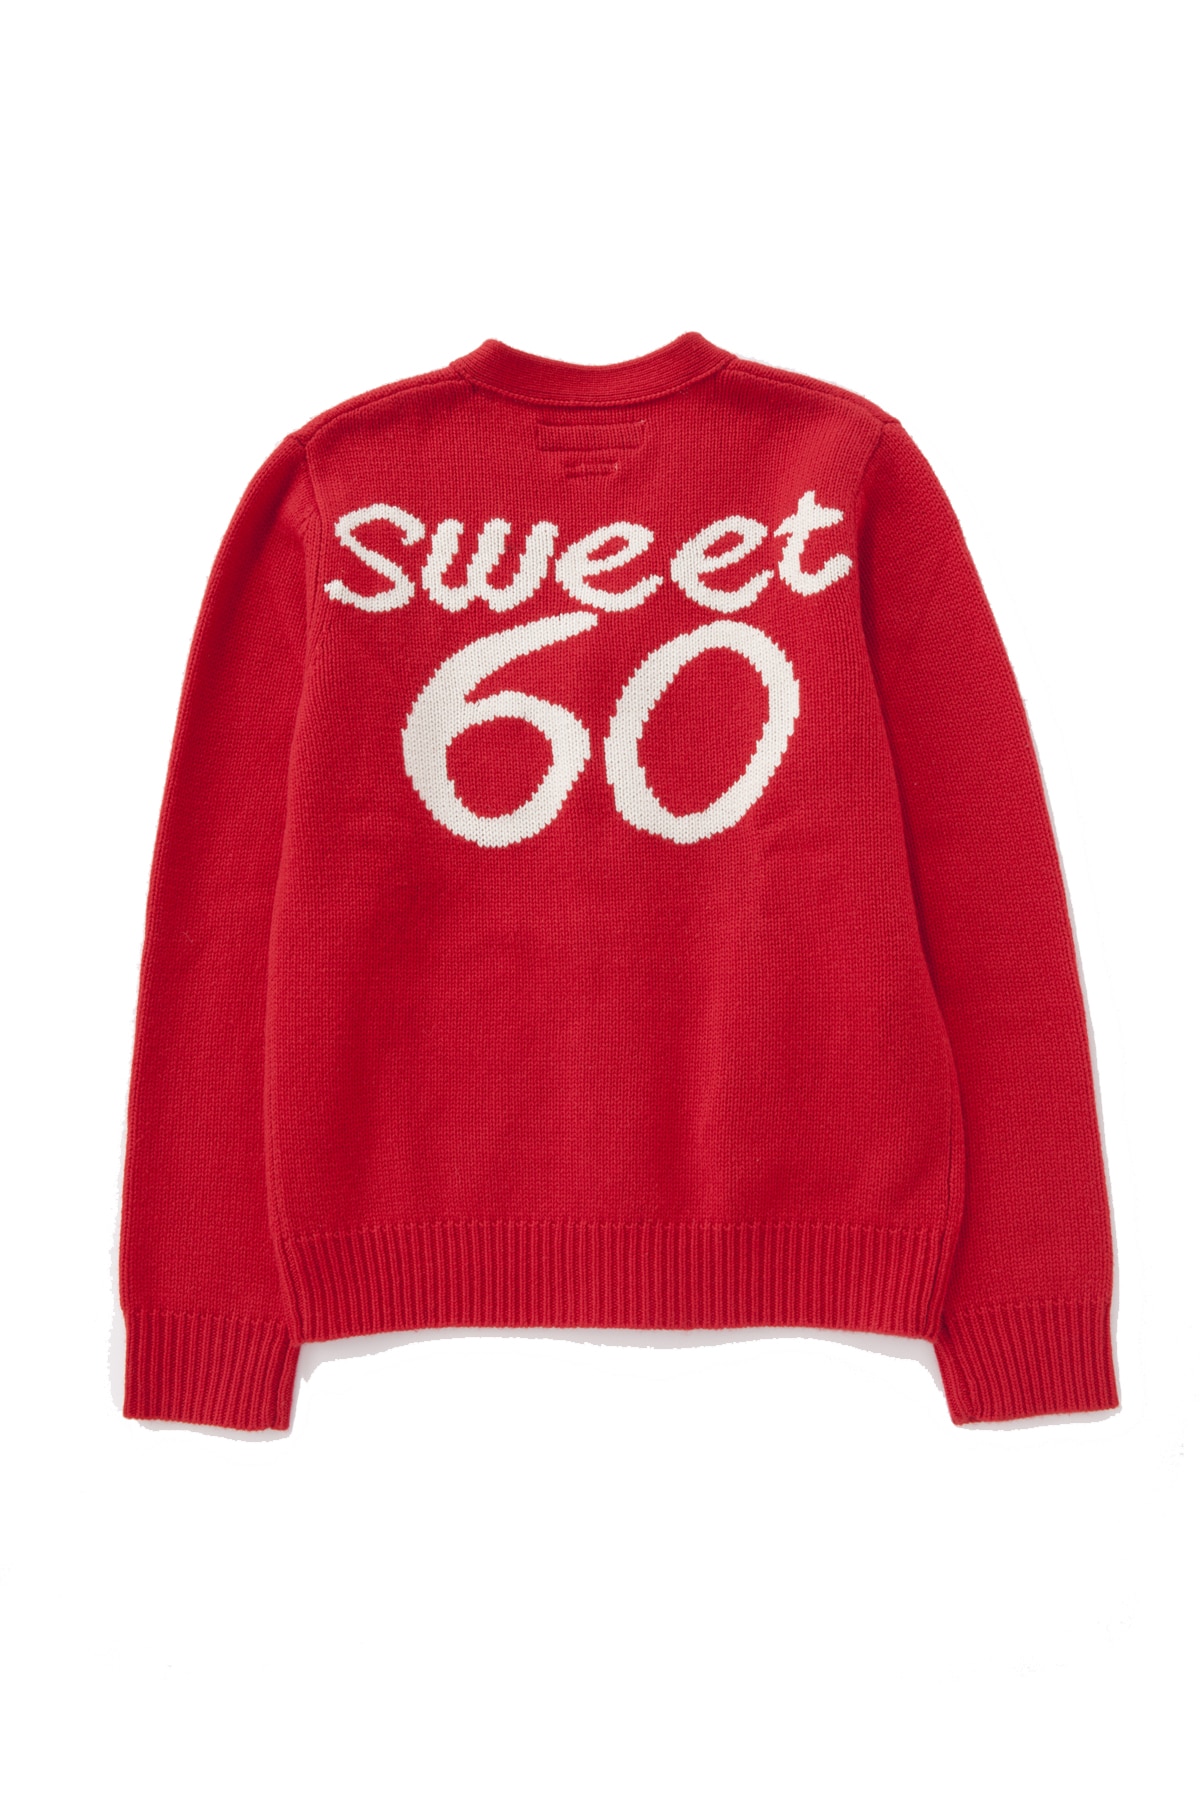 SWEET60 cotton knit Cardigans